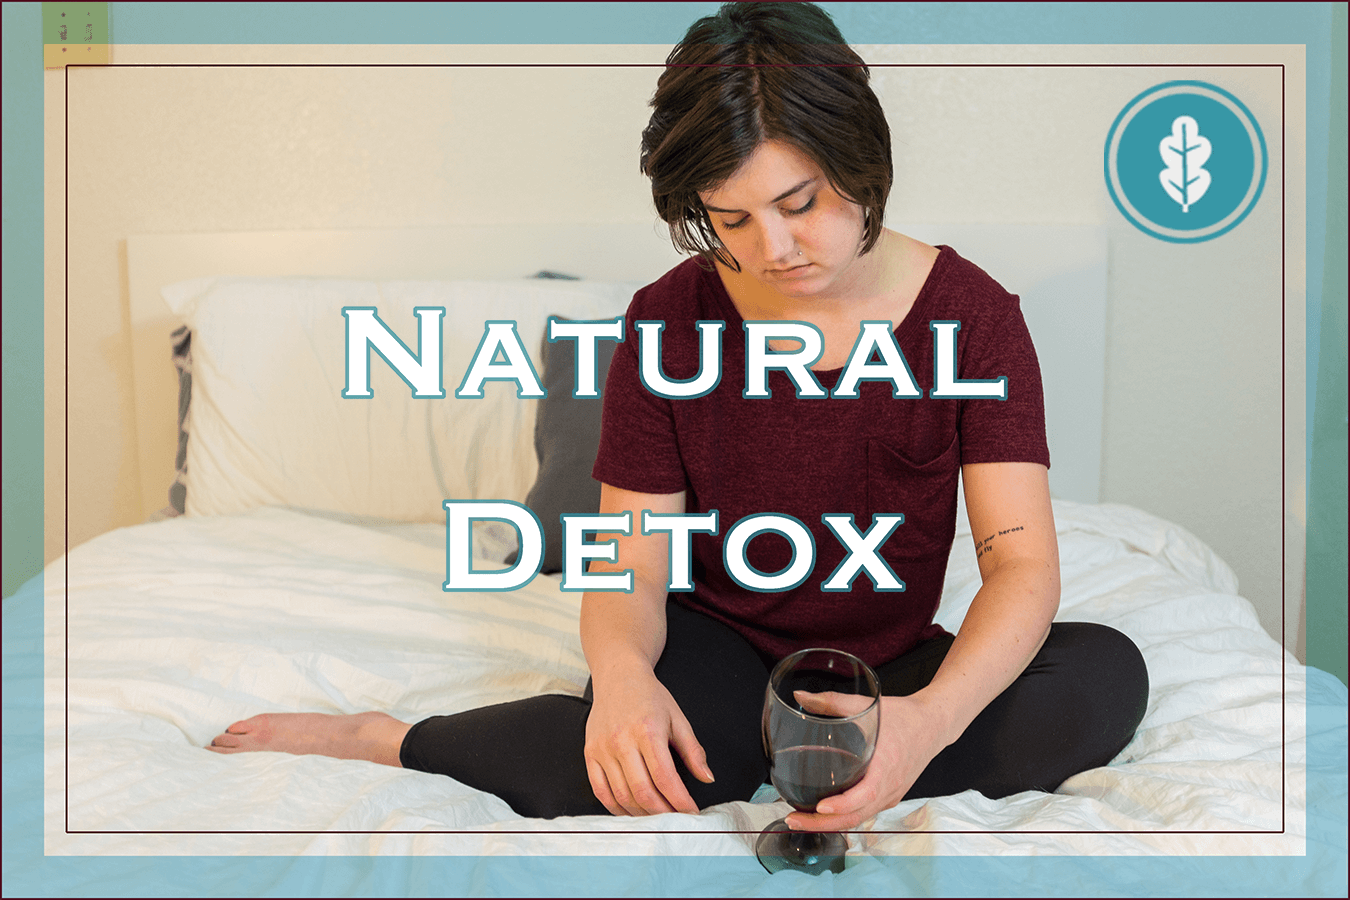 Naturally Detoxing from Alcohol - River Oaks